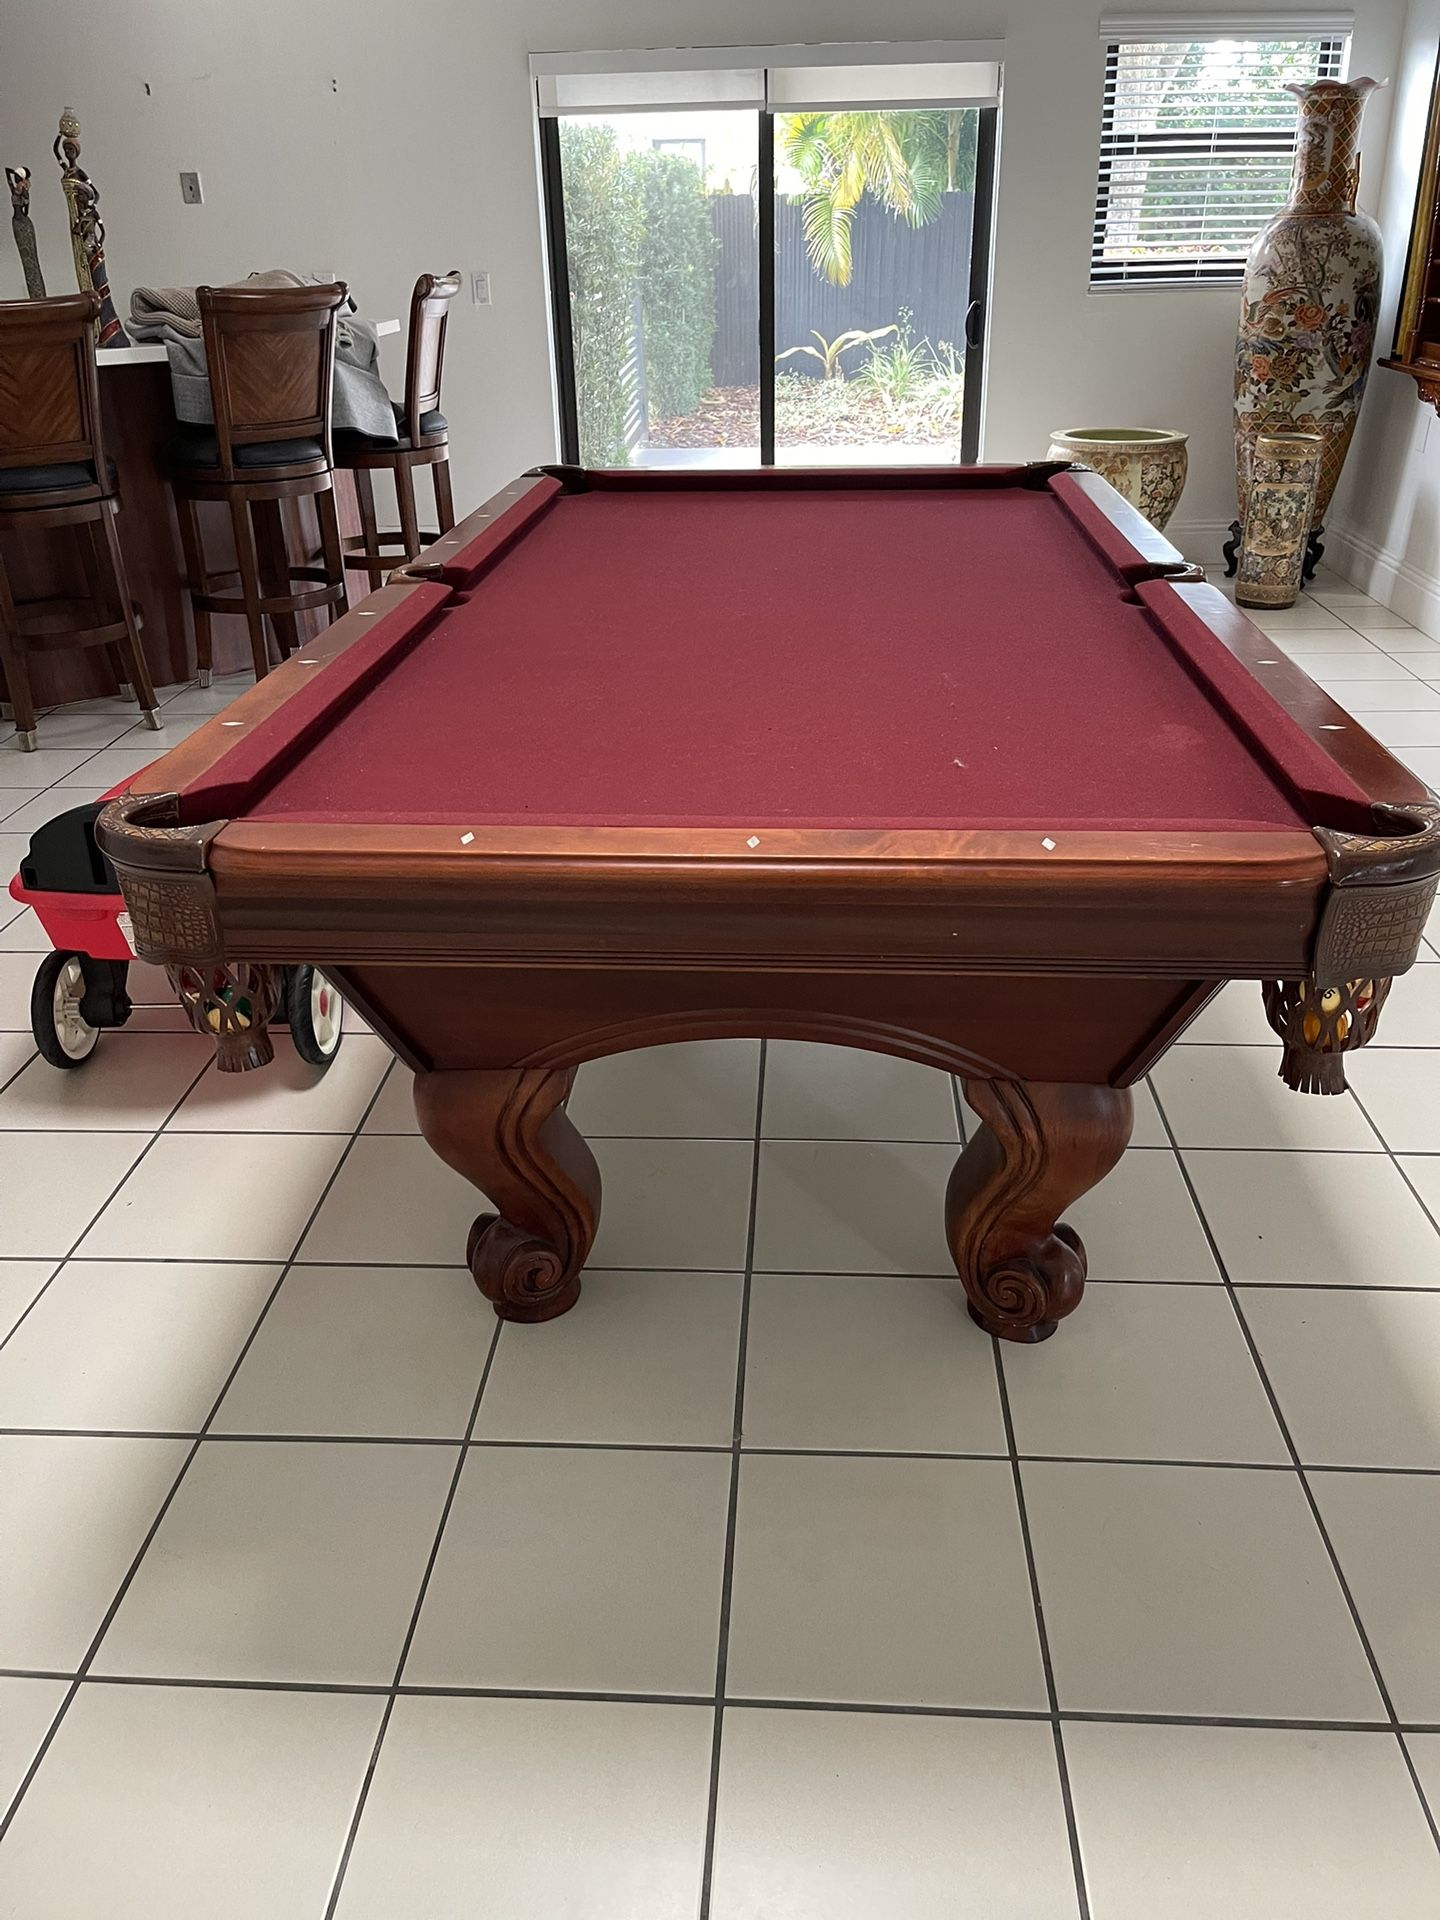 Pool Table With Complete Pool Stocks And Hanging Cabinet For Sticks